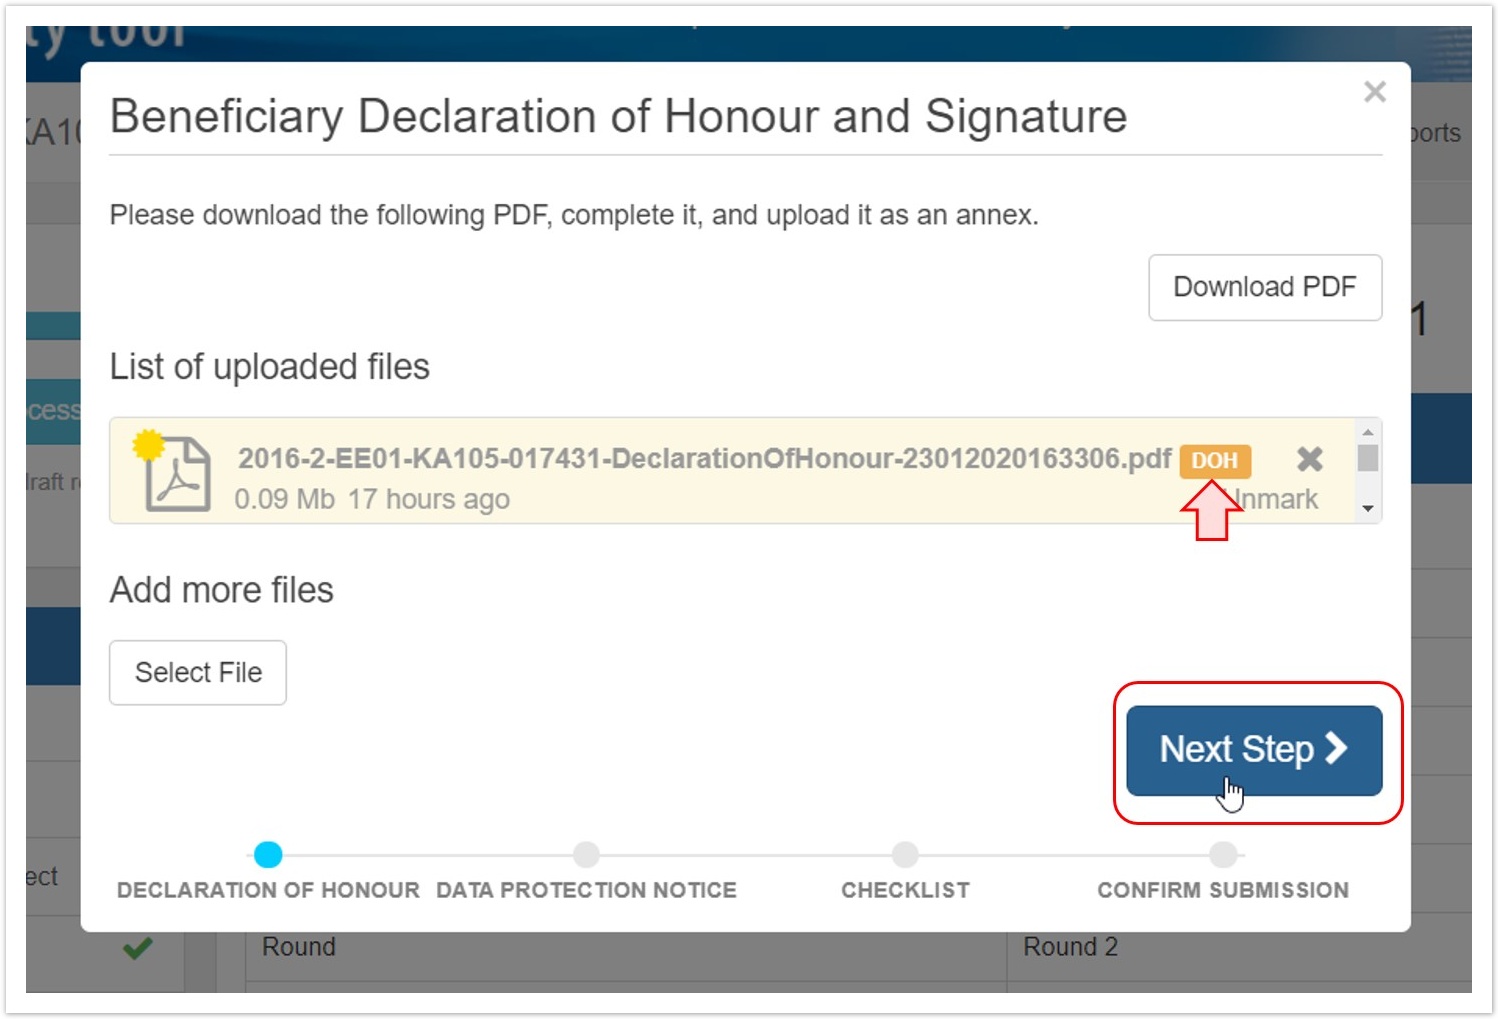 Check Beneficiary Declaration of Honour